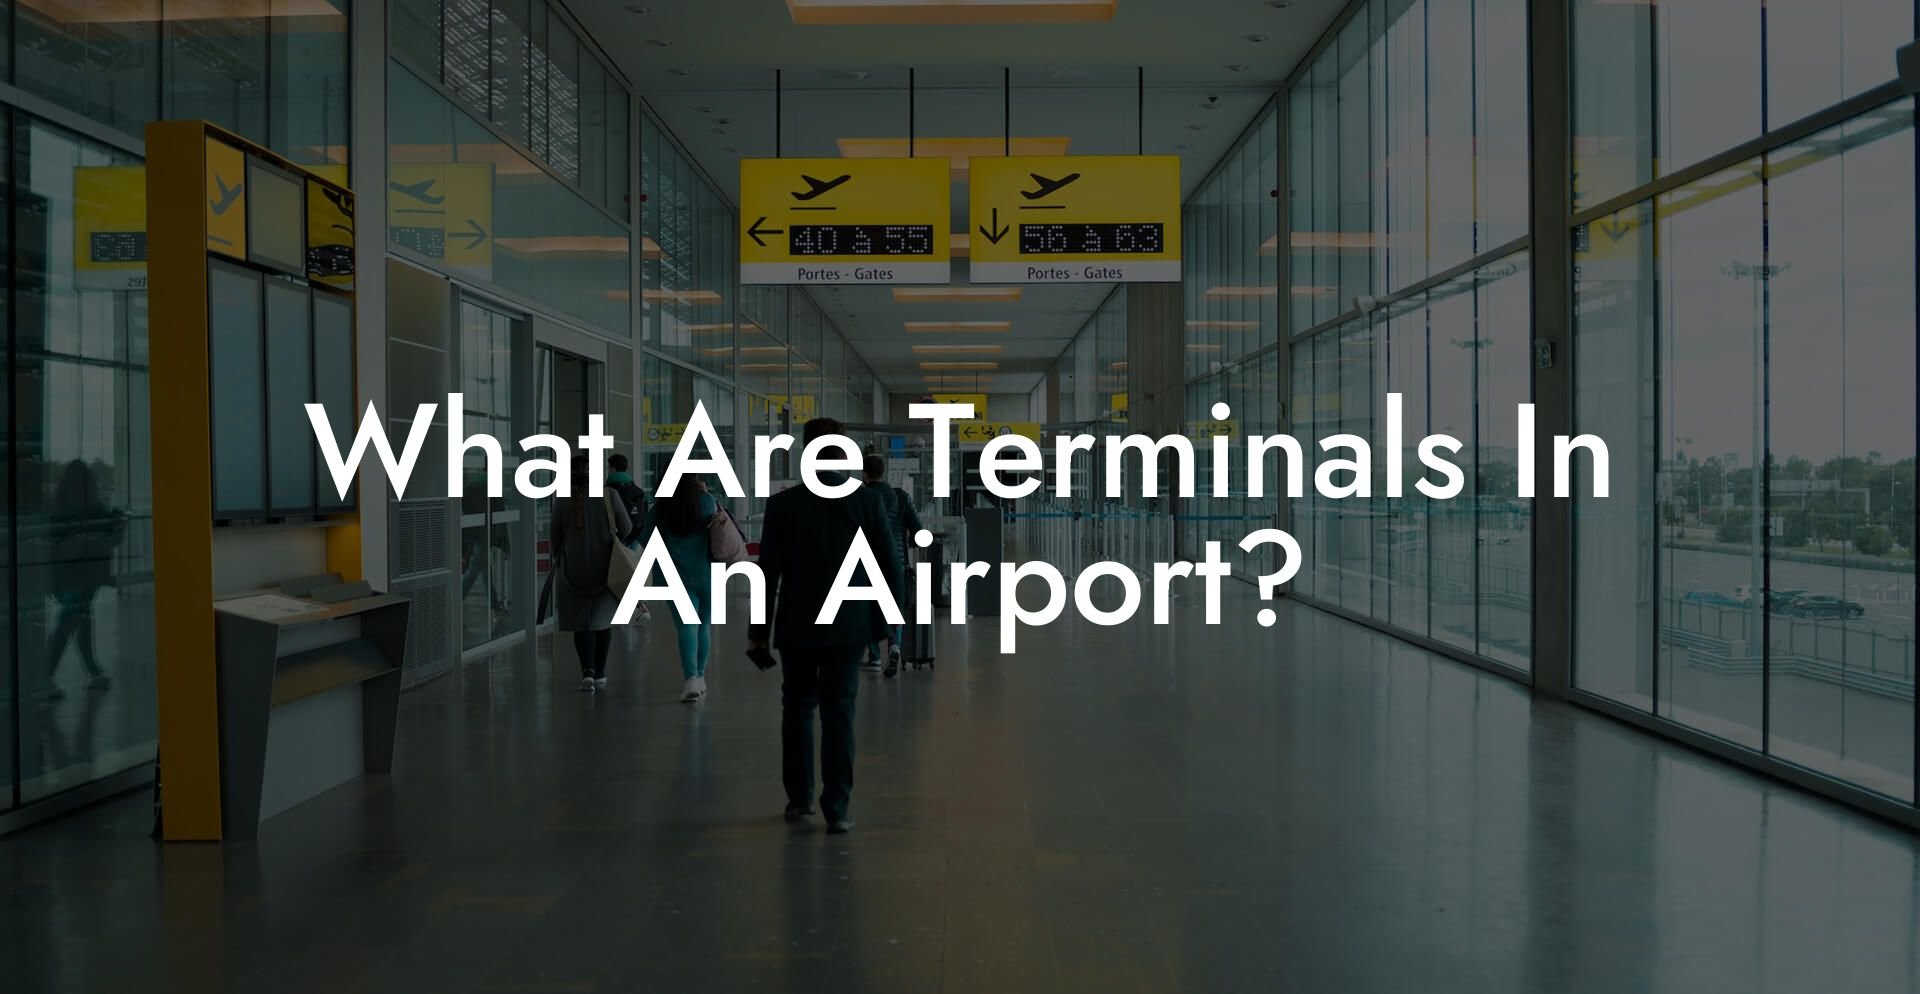 What Are Terminals In An Airport?